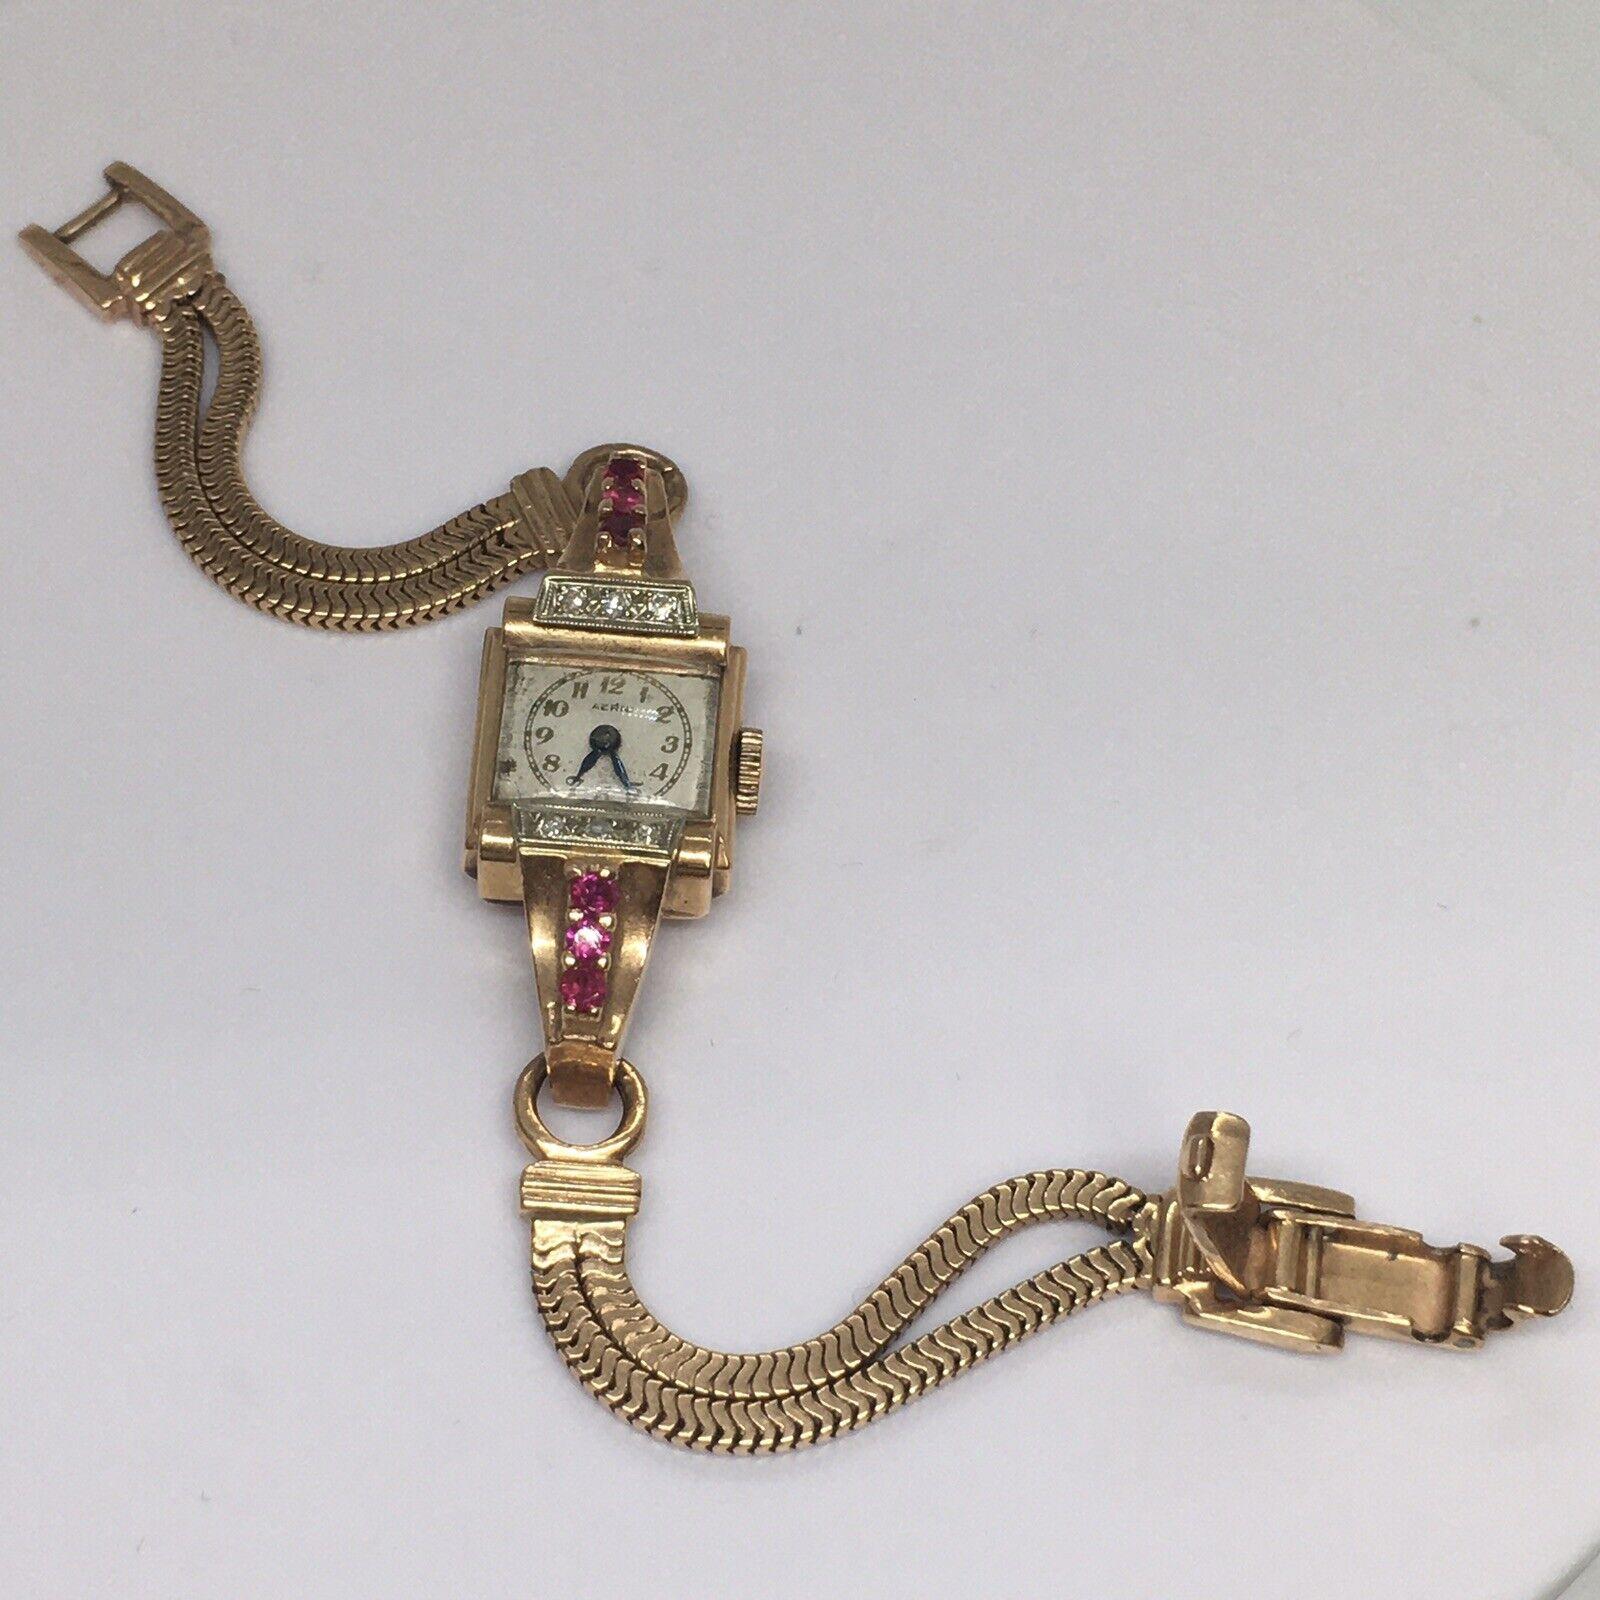 Lady's Charles Areni 14K Rose Gold Mechanical Watch Ruby Diamond Retro 1940s

Wrist Length 6.5 inch
Case 15 mm by 38 mm, 6 round cut Ruby(Not tested) at 2.2 mm, 6 Round Single Cut Diamonds 
Bracelet 7 mm wide
Marking  